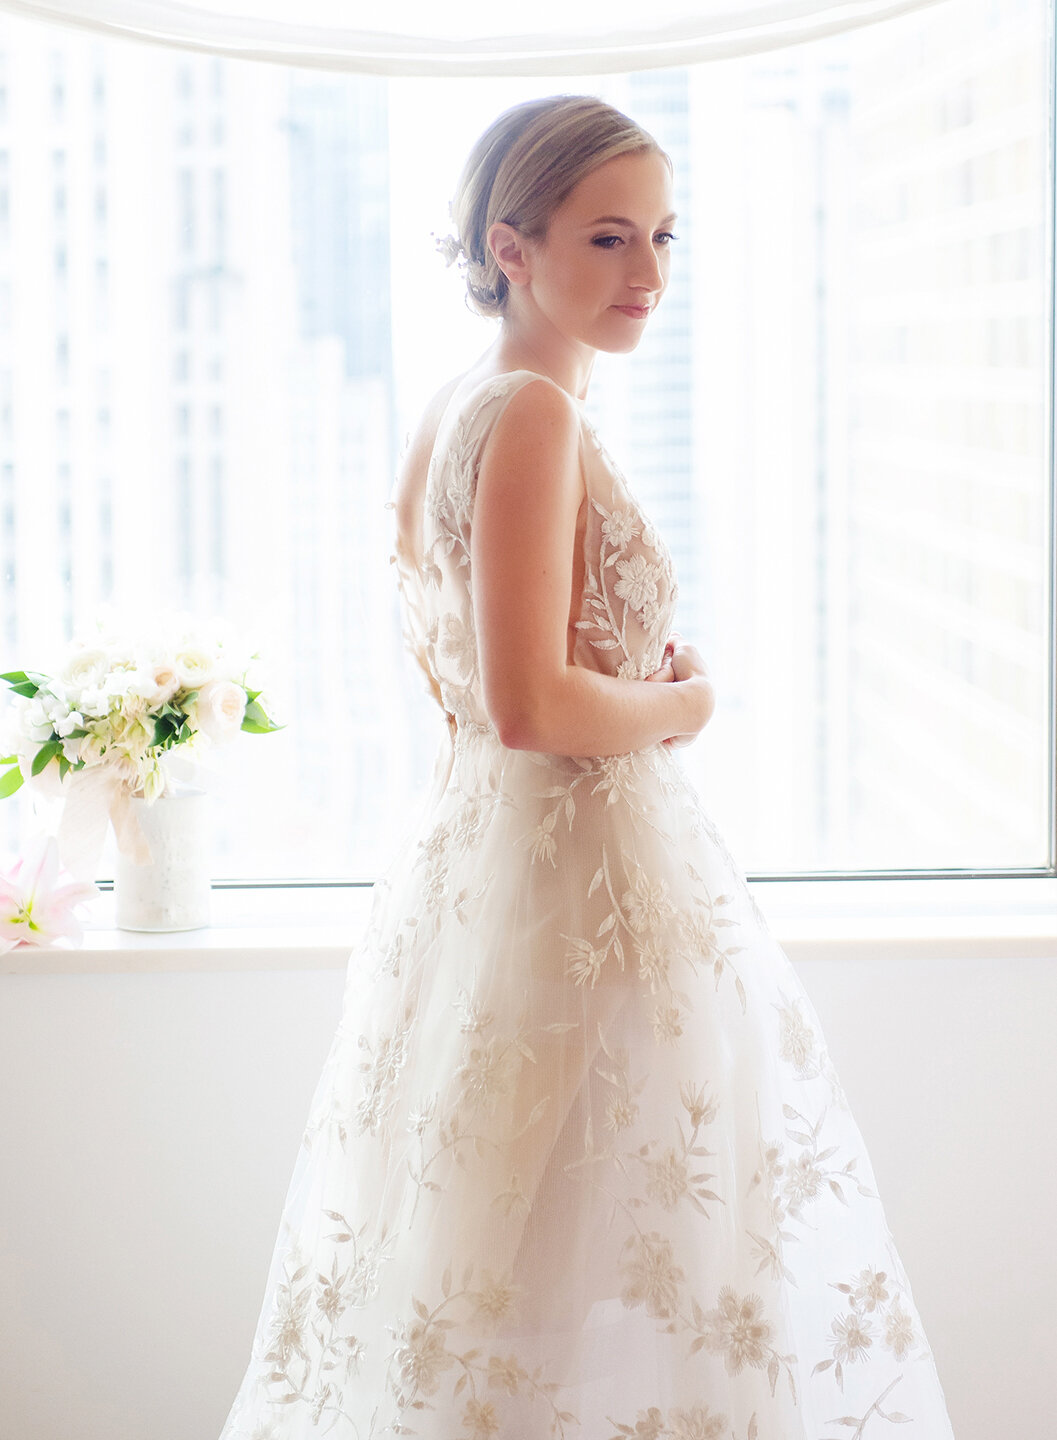 Bride portrait at Lotte Palace Hotel NYC